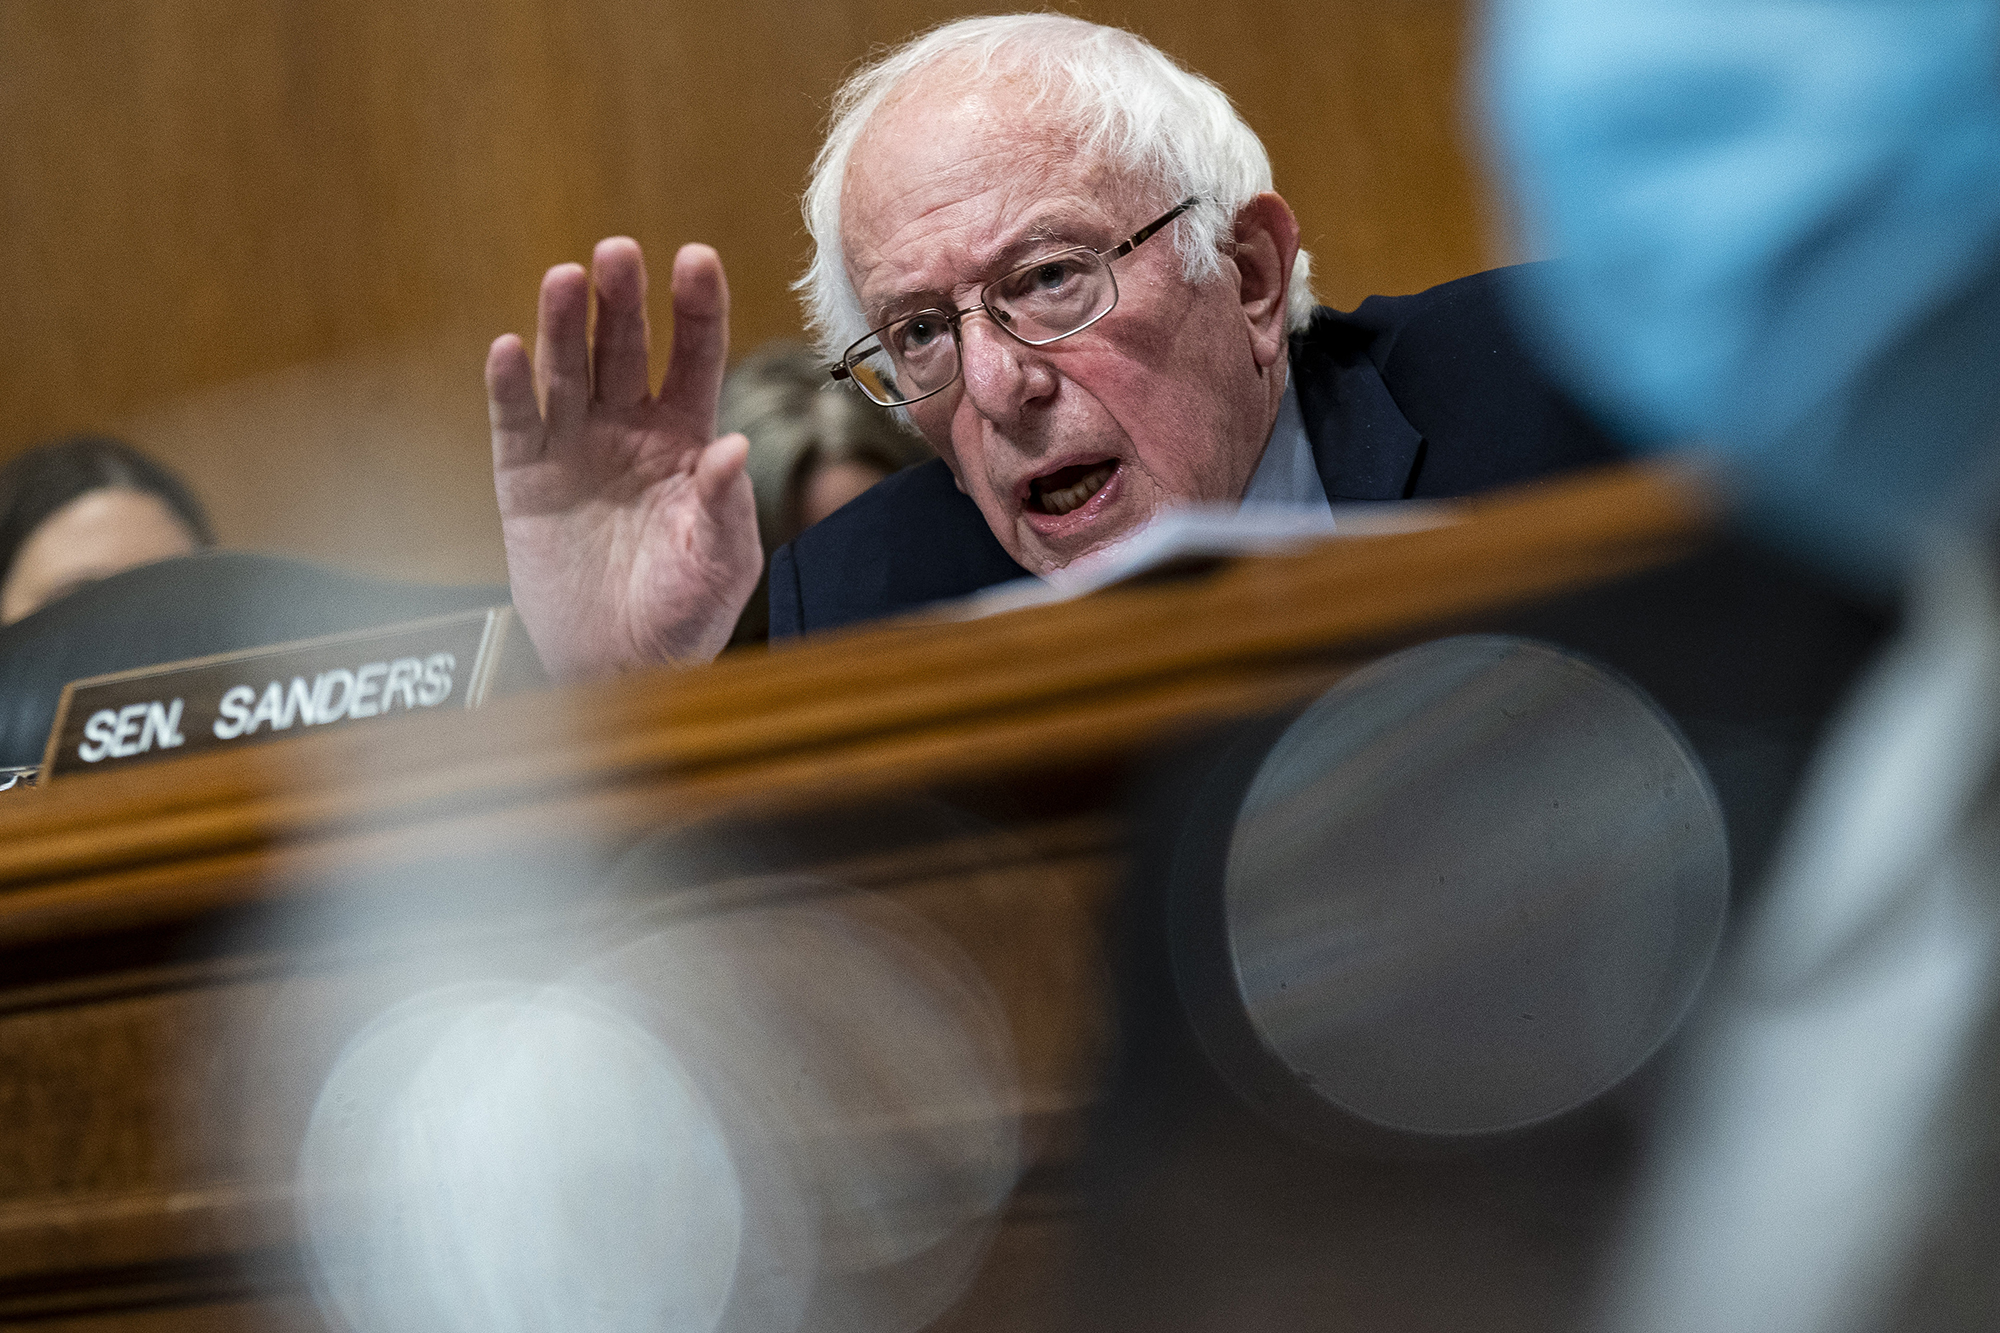 Senator Bernie Sanders, an independent from Vermont, speaks during a Senate Environment and Public Works Committee hearing in Washington, DC, on Thursday, March 9. 